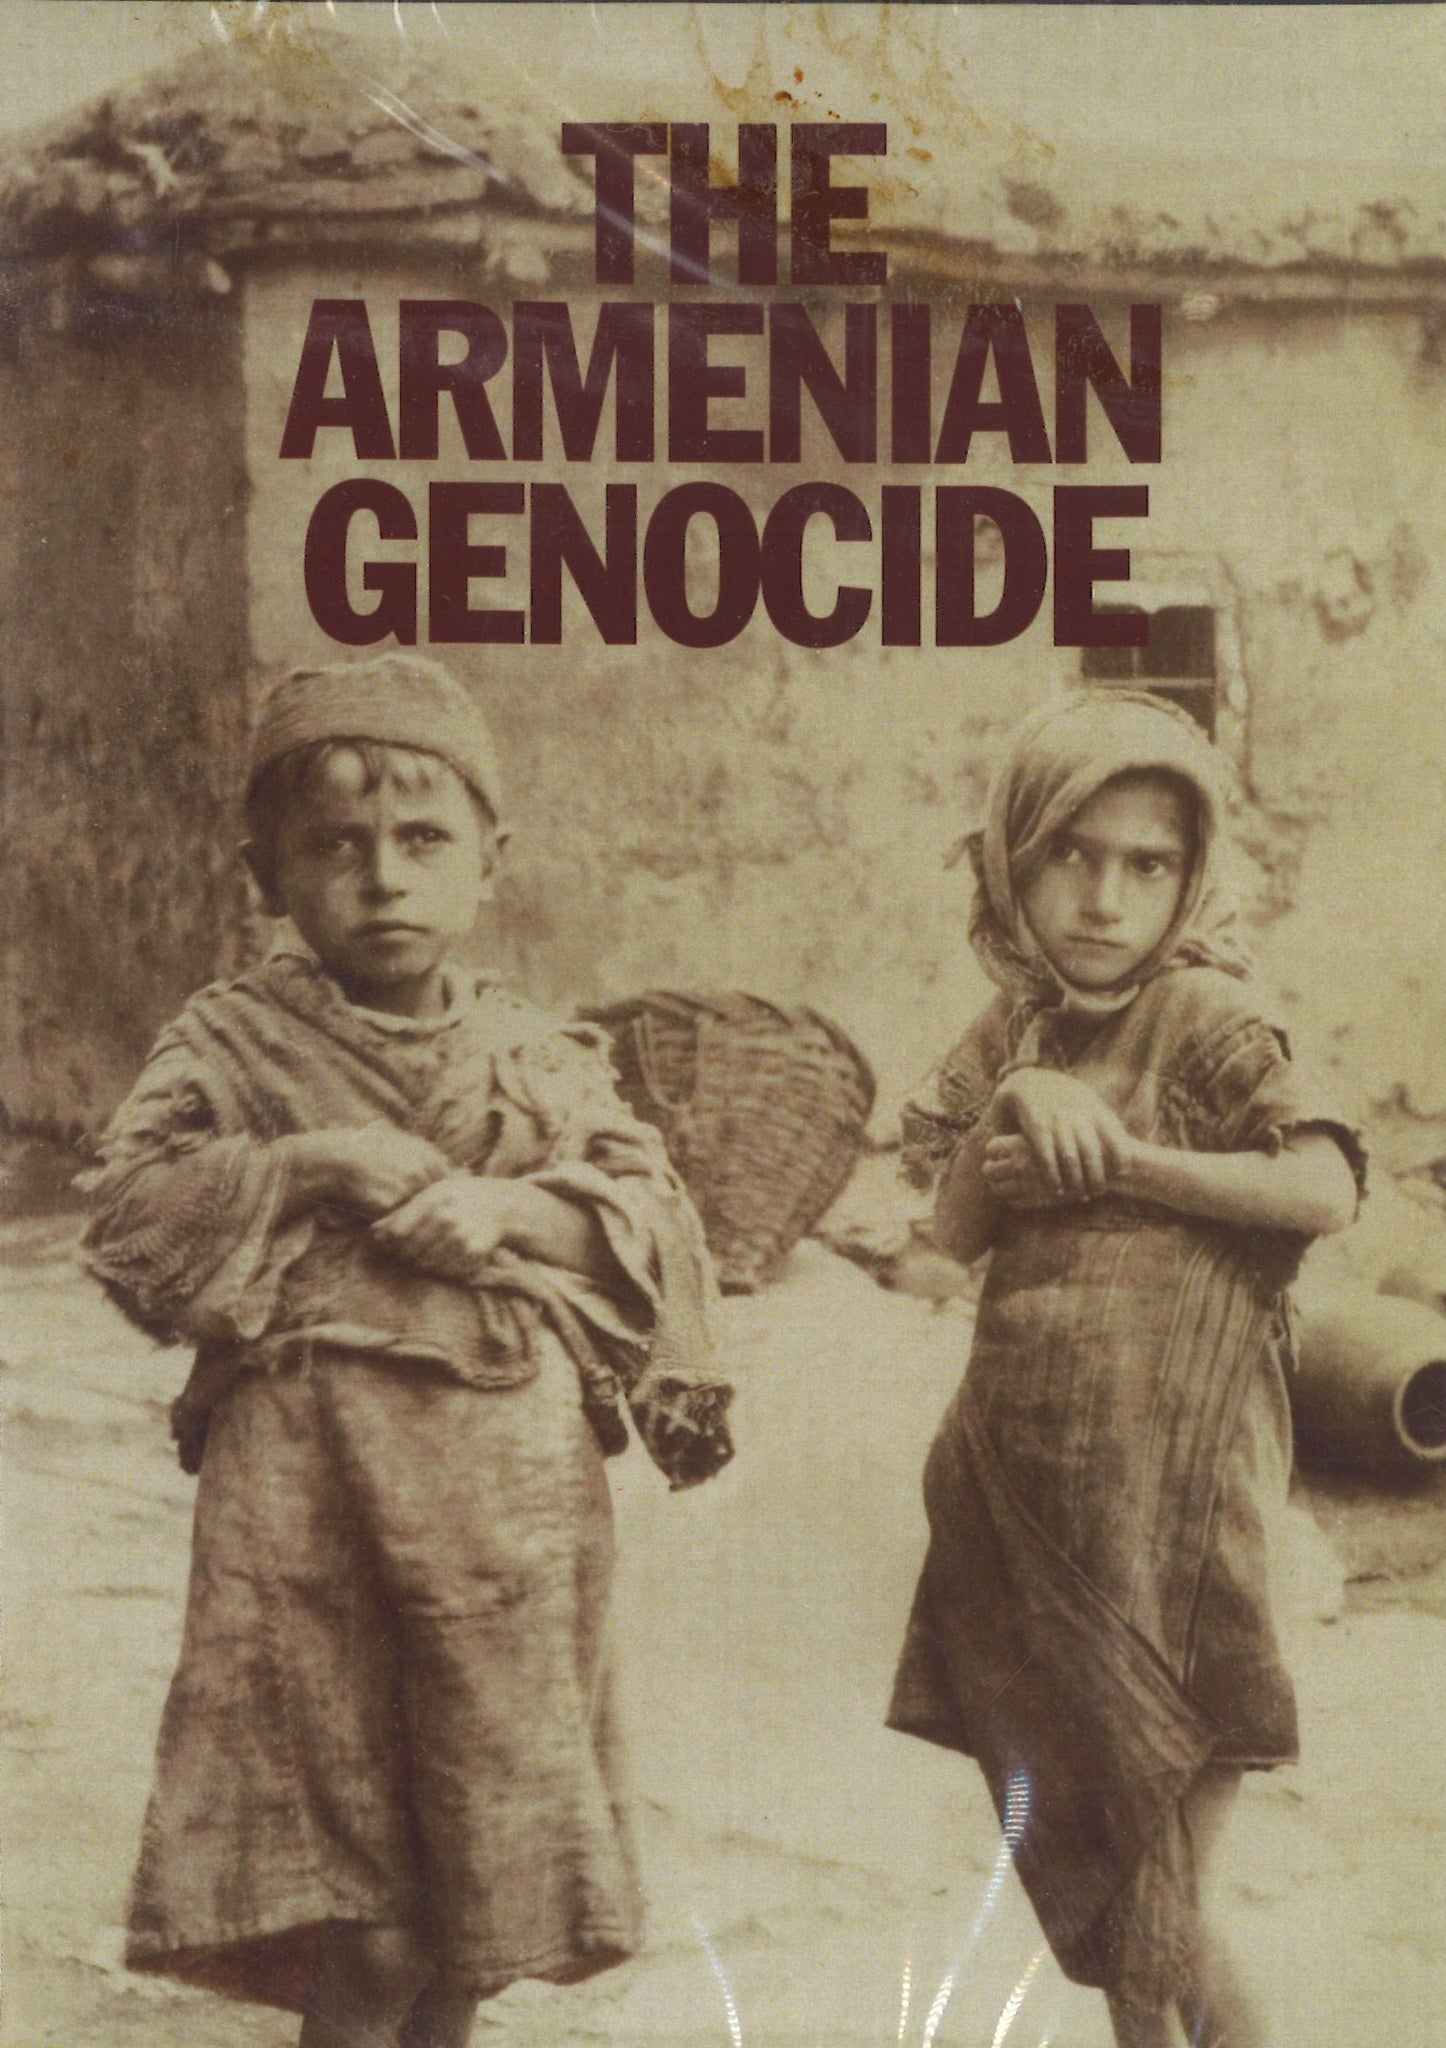 ARMENIAN GENOCIDE, THE